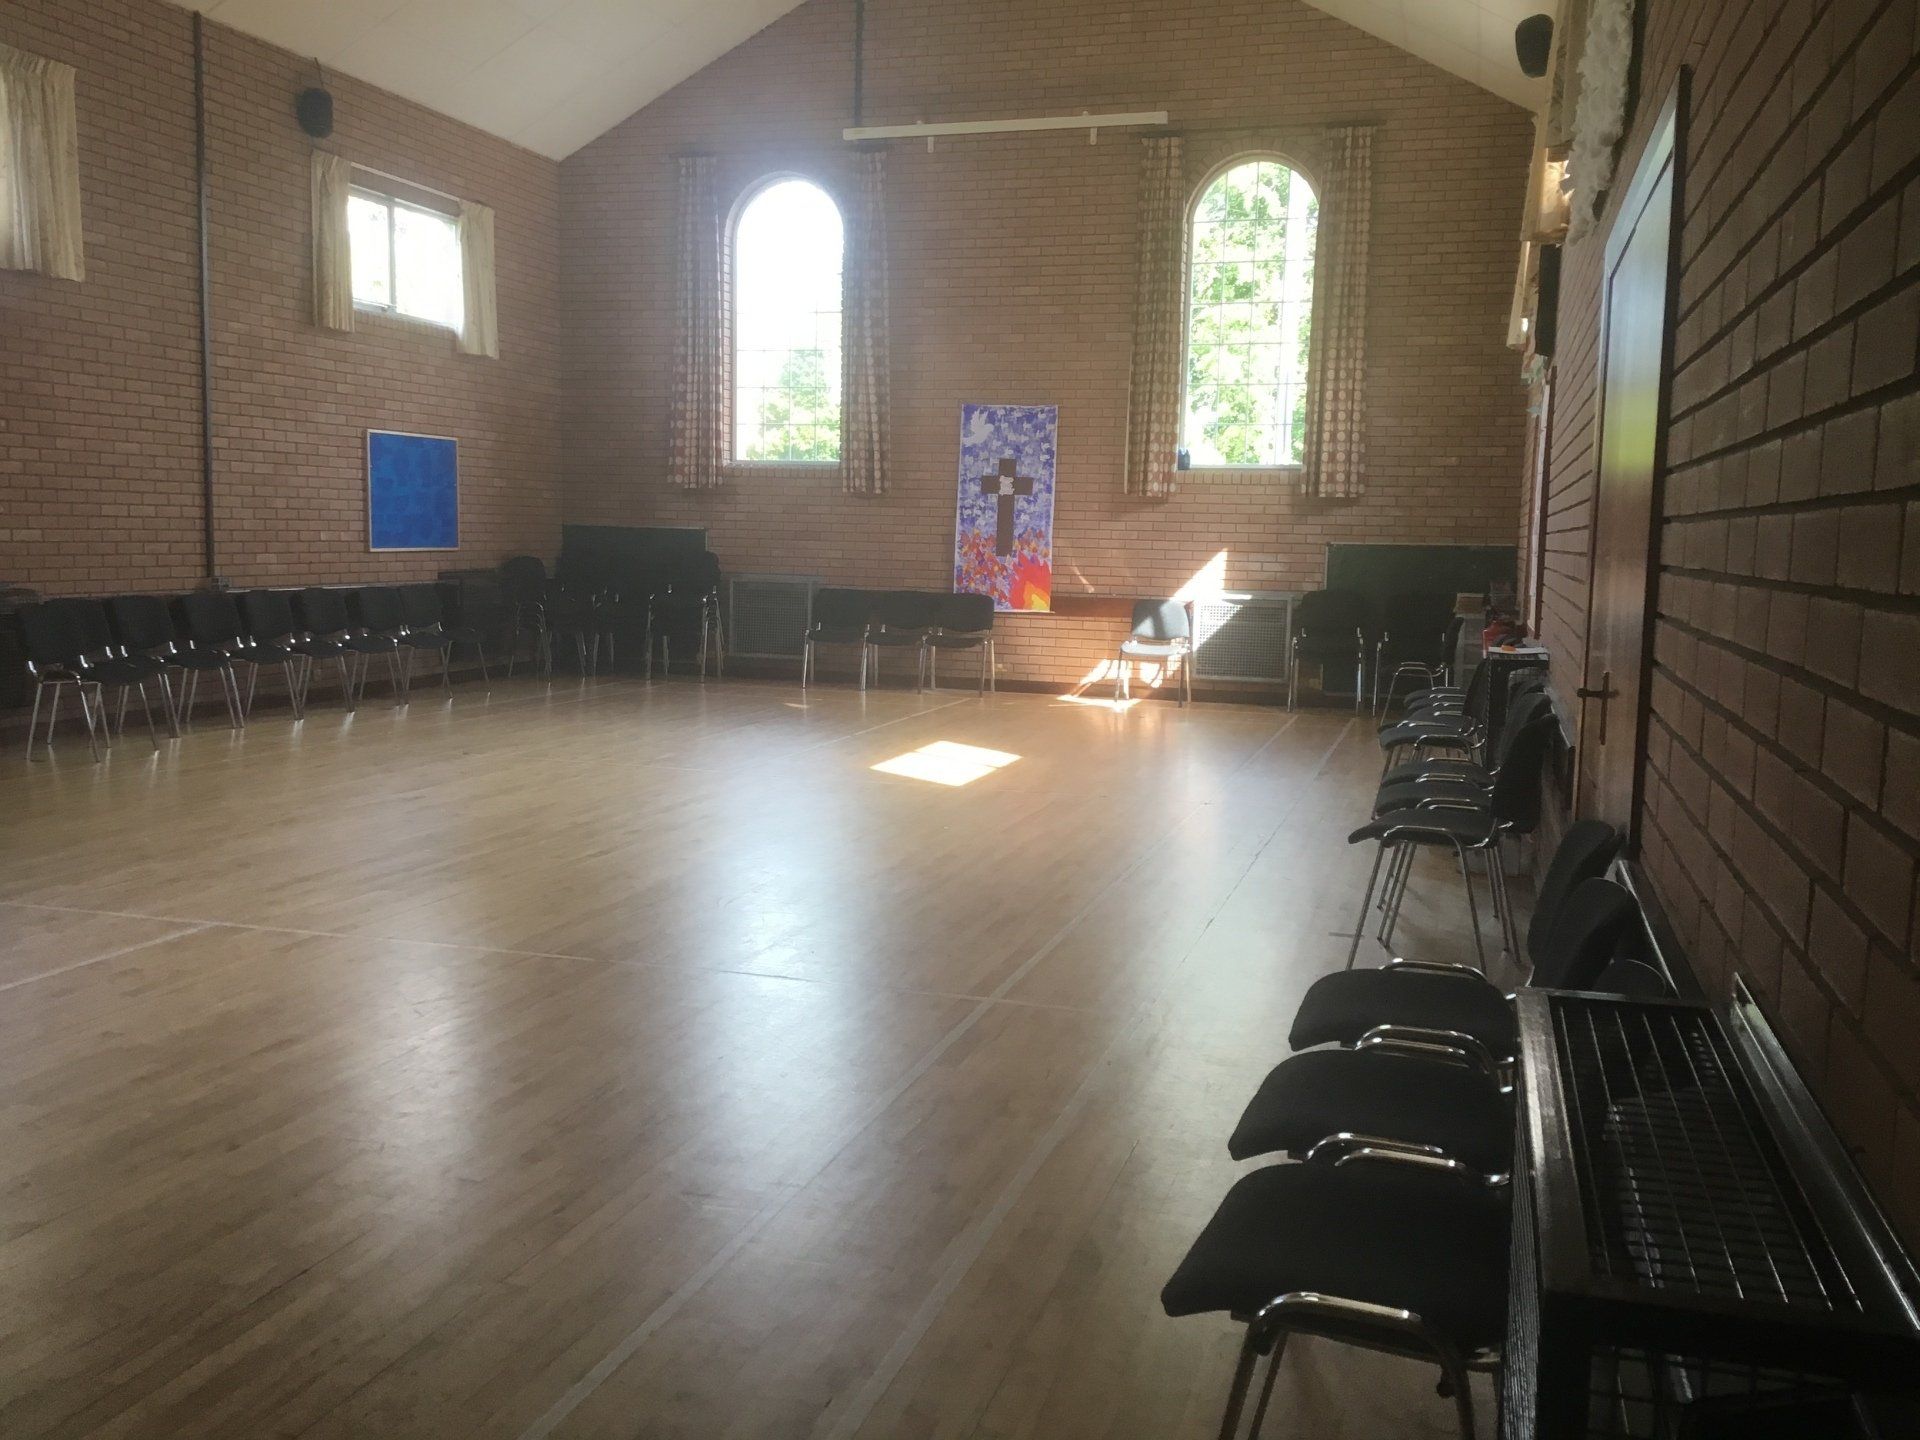 Photograph of the interior of the Church Hall at Craigmore Methodist Church